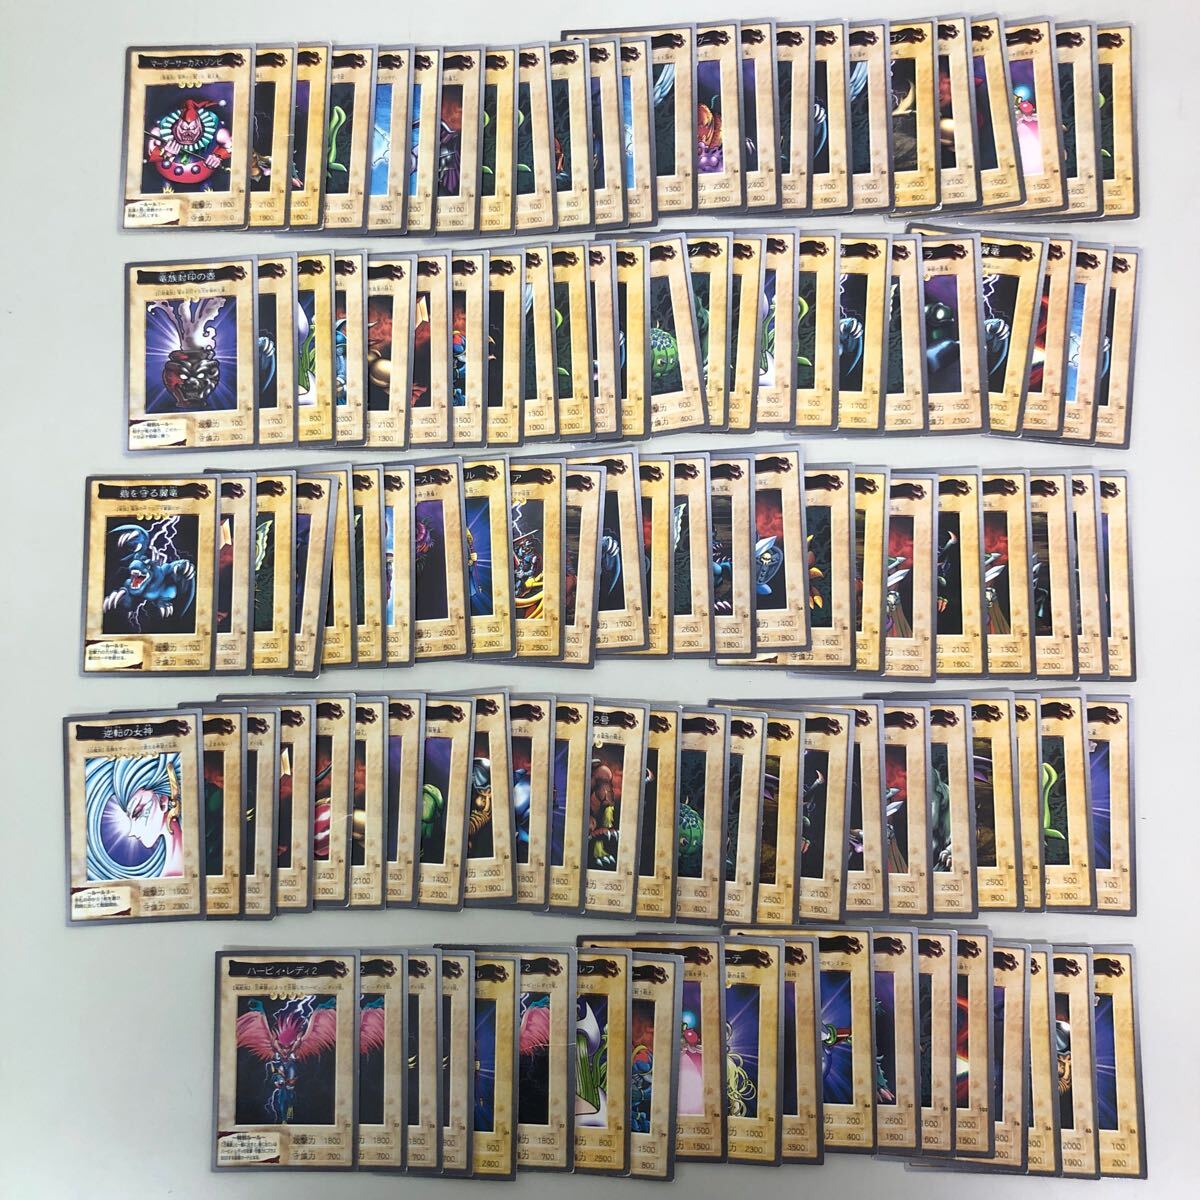  Bandai version Yugioh approximately 450 sheets set sale almost normal 